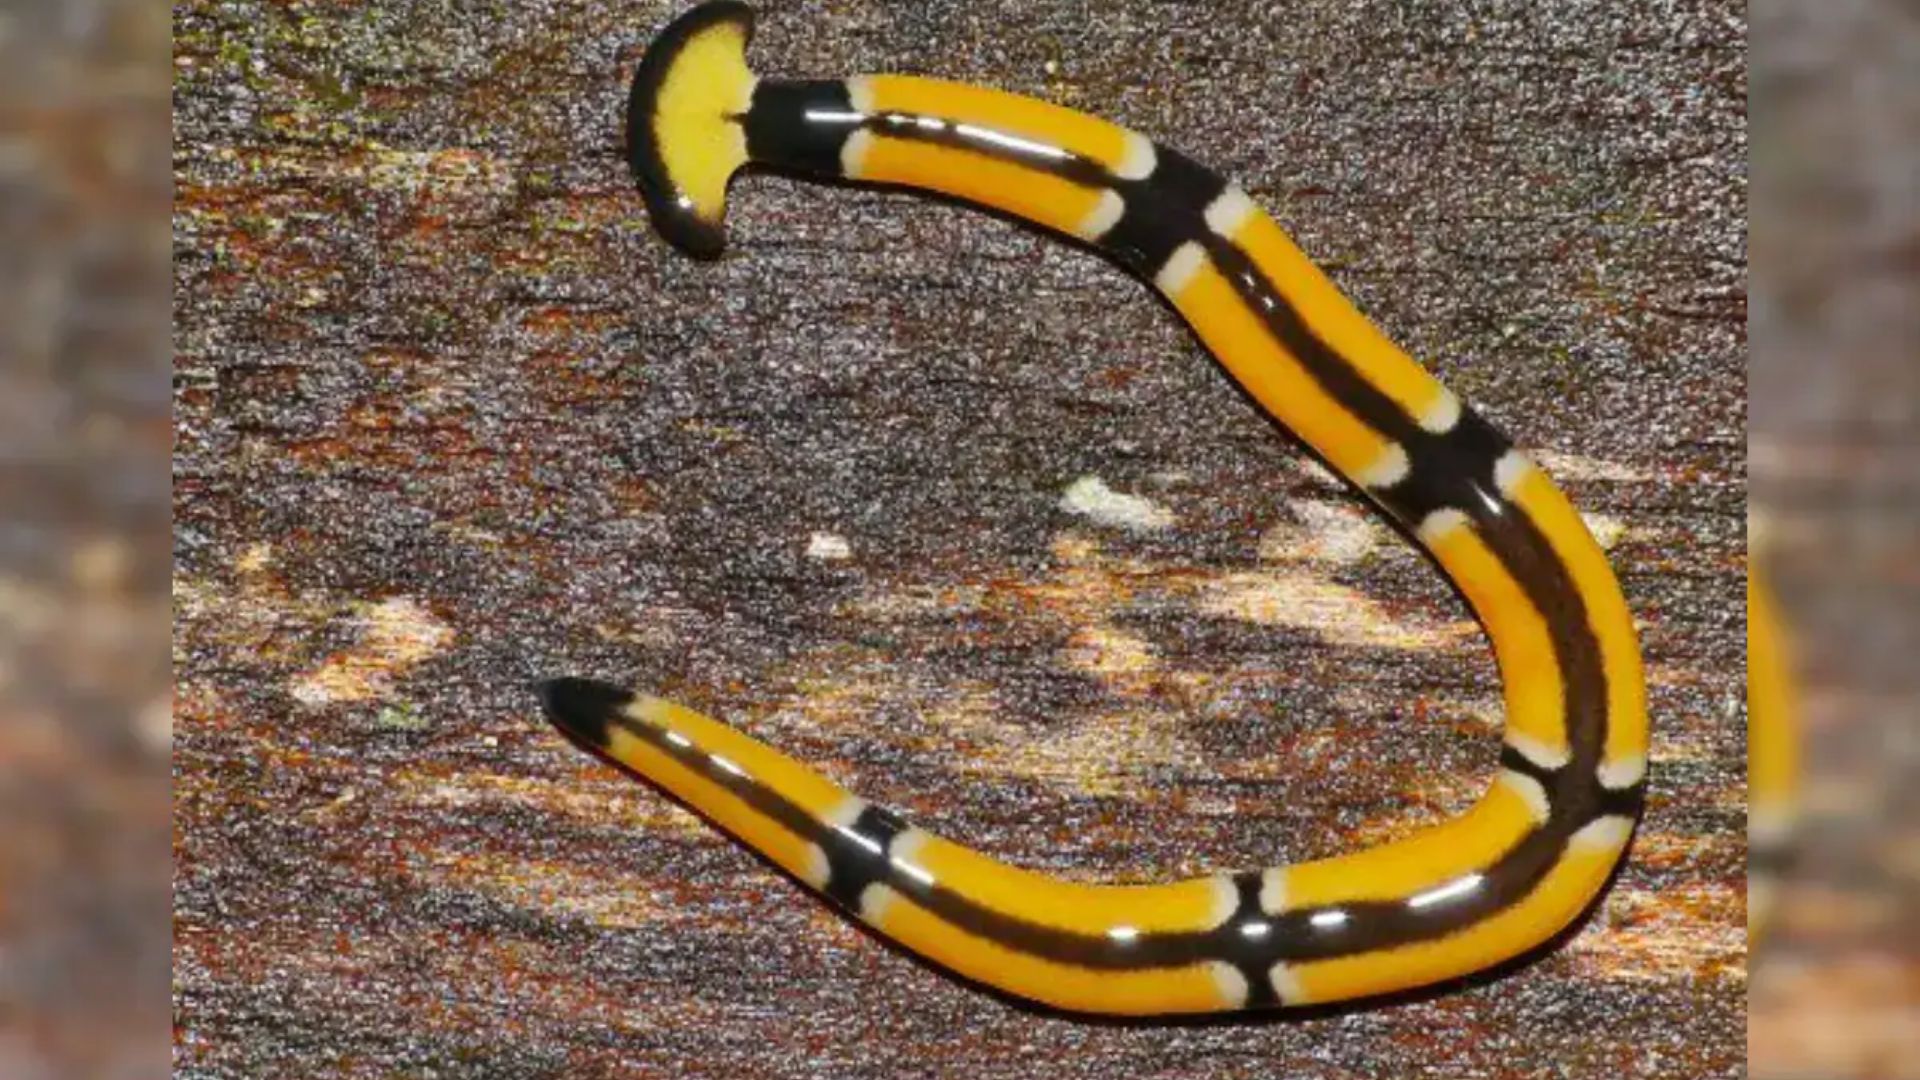 Texas Rains Bring Out Giant Poisonous Worms That Regenerate When Cut